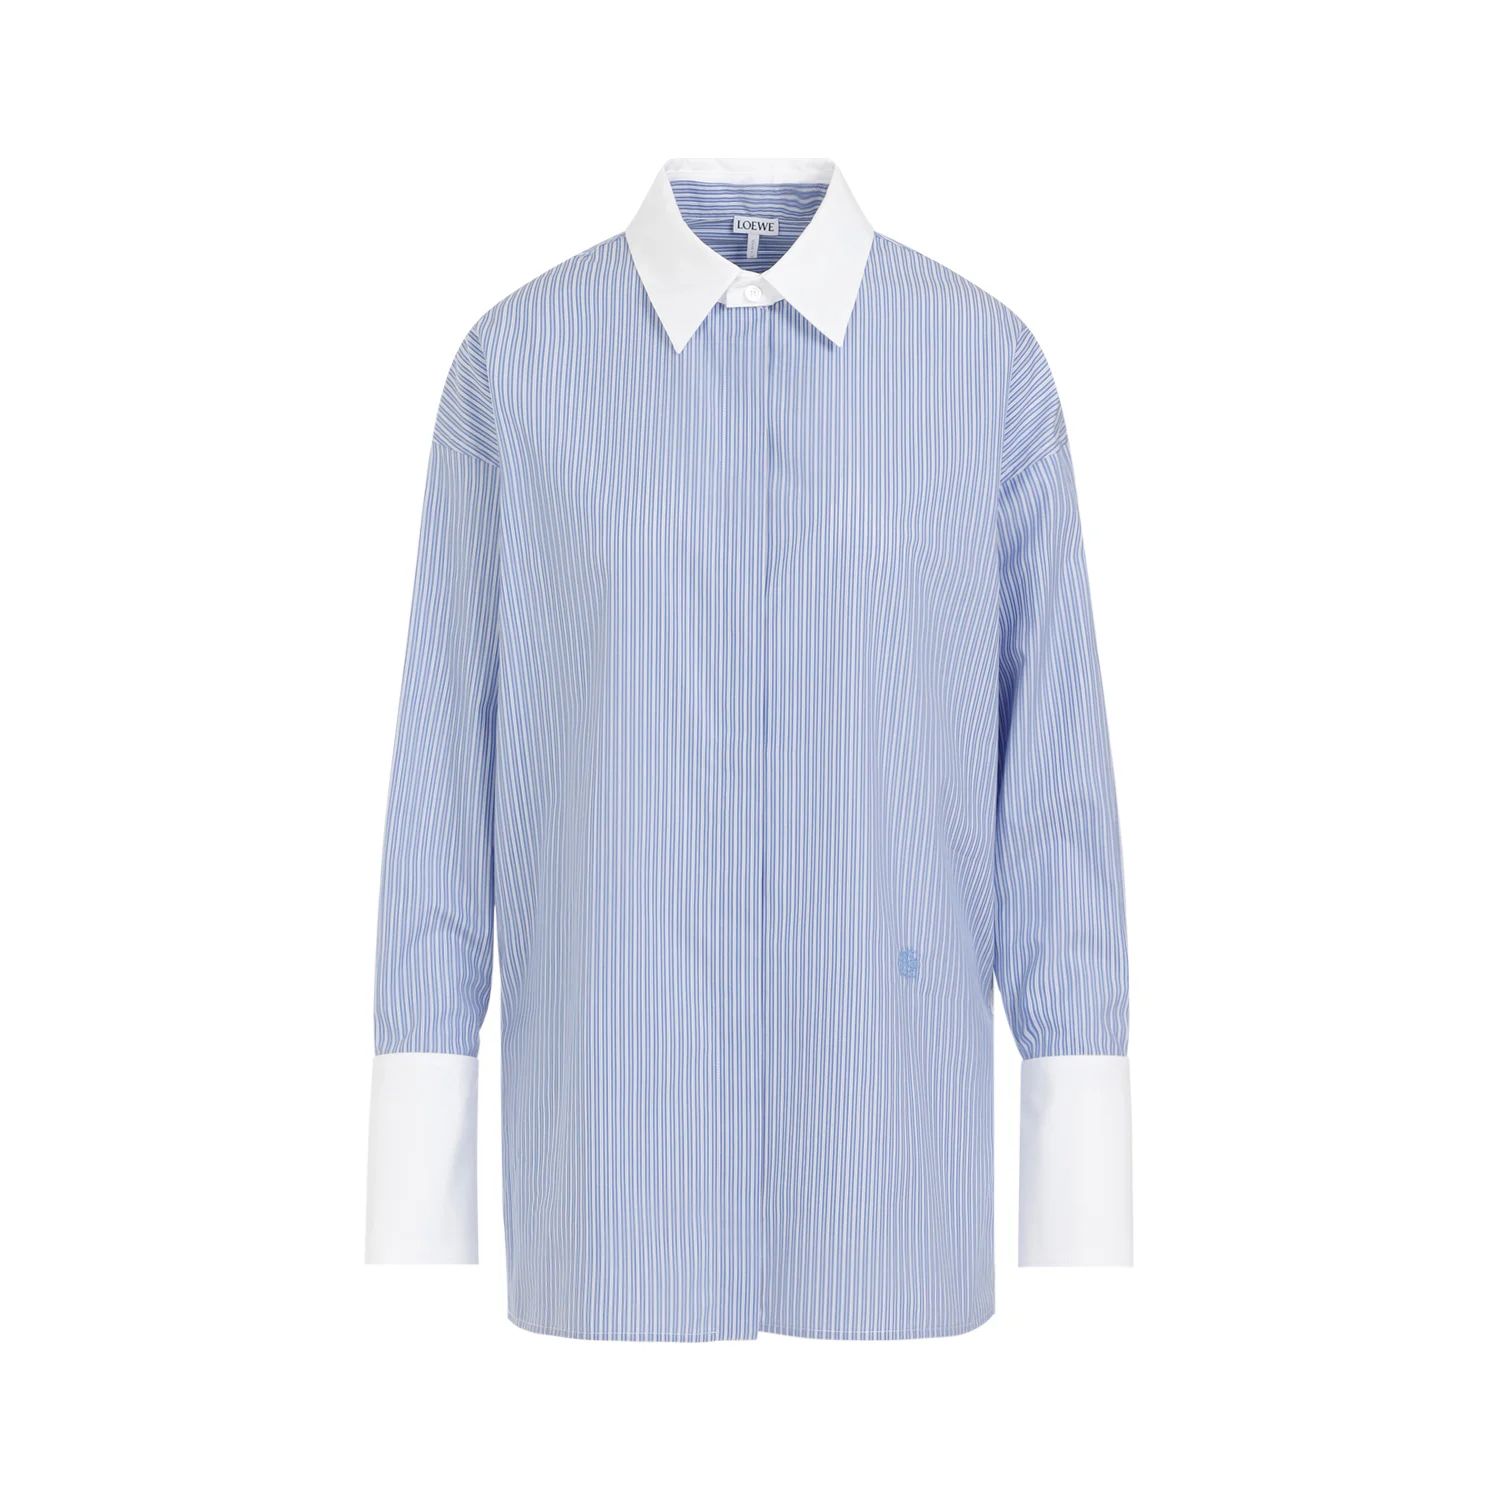 Loewe Striped Deconstructed Shirt | Cettire Global